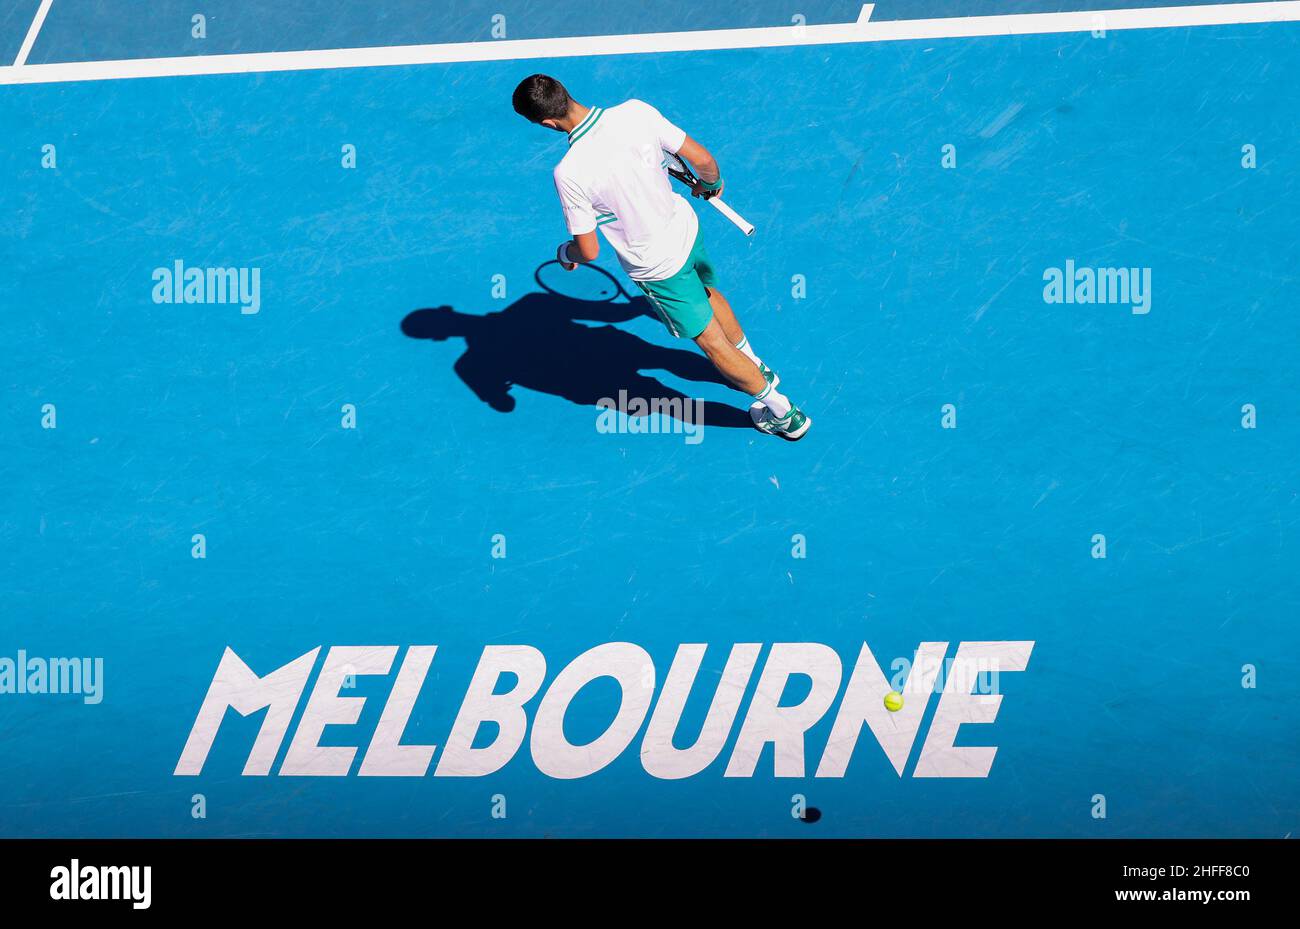 Melbourne, Australia. 16th Jan, 2022. File photo taken on Feb. 10, 2021 shows Novak Djokovic competes during Autralian open 2021 in Melbourne, Australia. Australia's Federal Court on Jan. 16, 2022 dismissed the world No. 1's application to have his visa cancelation overturned one day before the start of the Australian Open, in which Djokovic had been expected to defend his title. Credit: Bai Xuefei/Xinhua/Alamy Live News Stock Photo